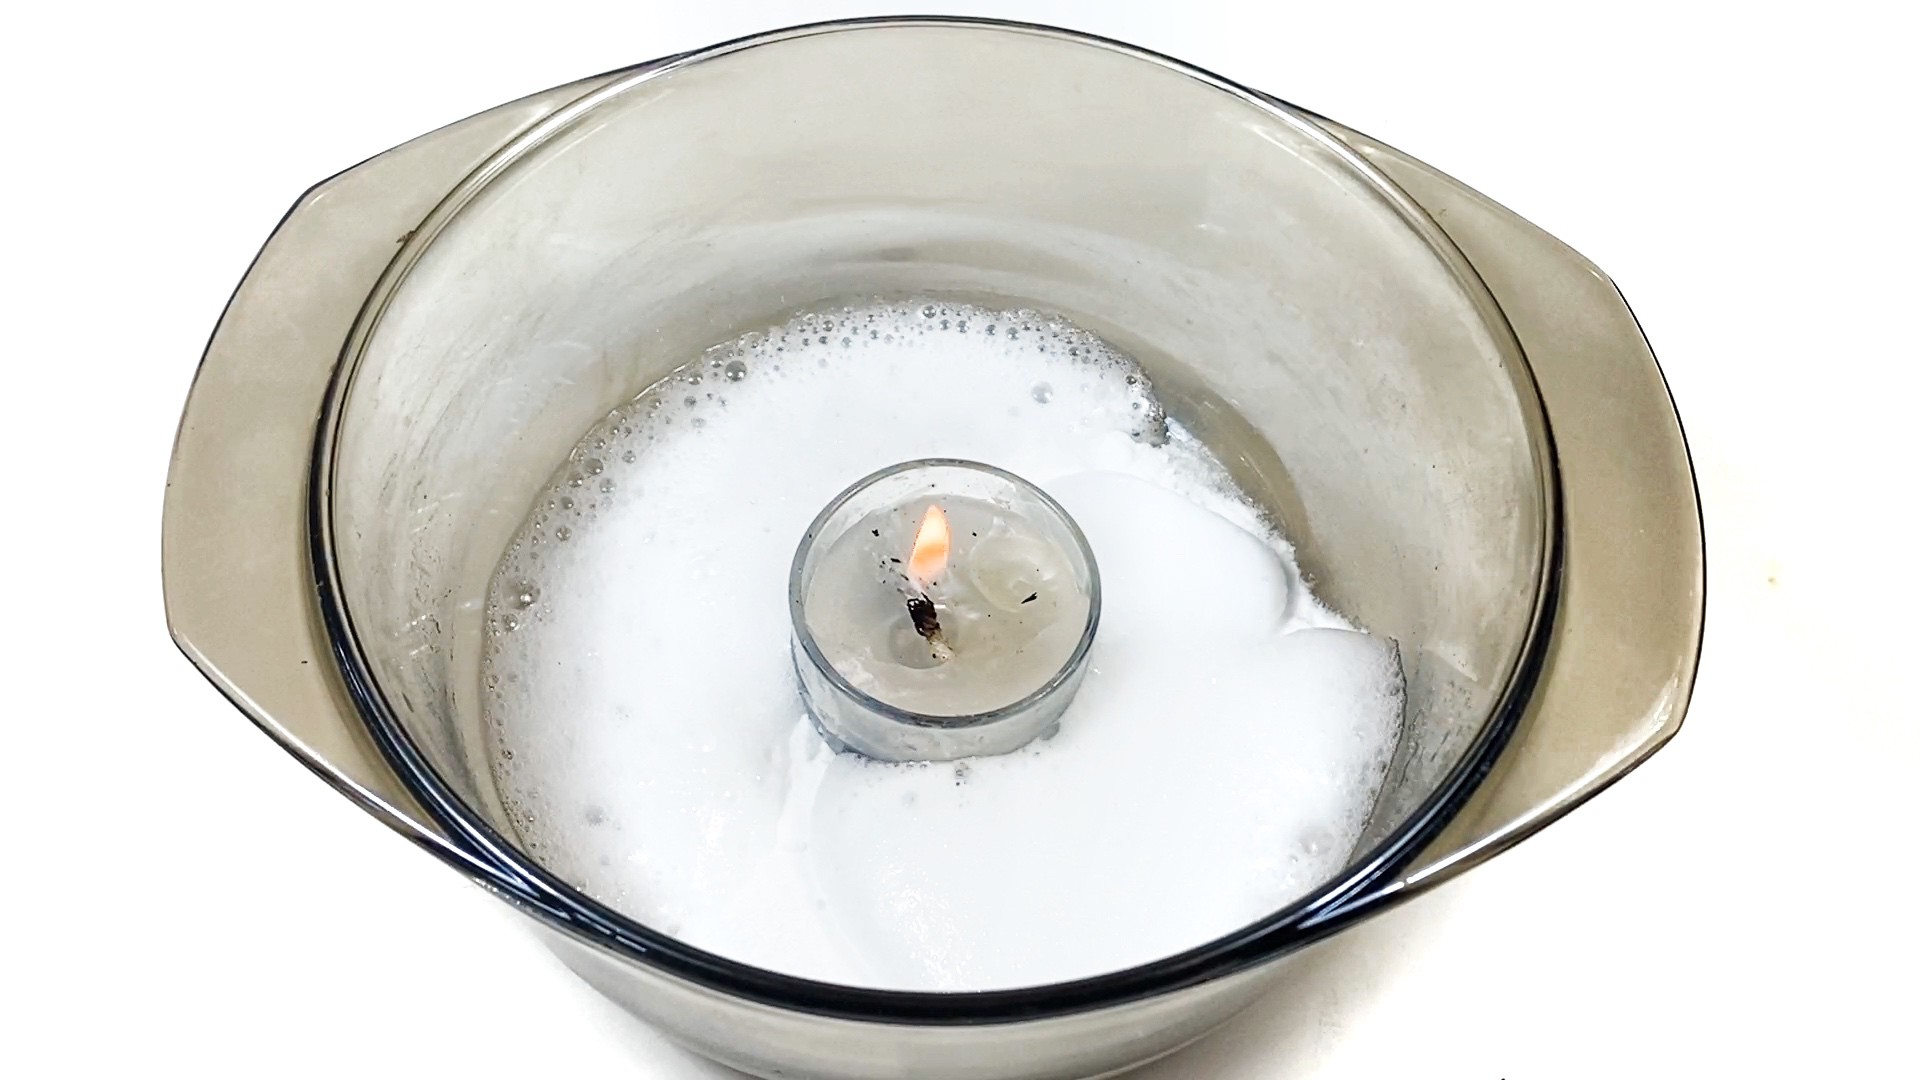 A glass bowl with a burning candle inside. Around the candle, there is white foam.